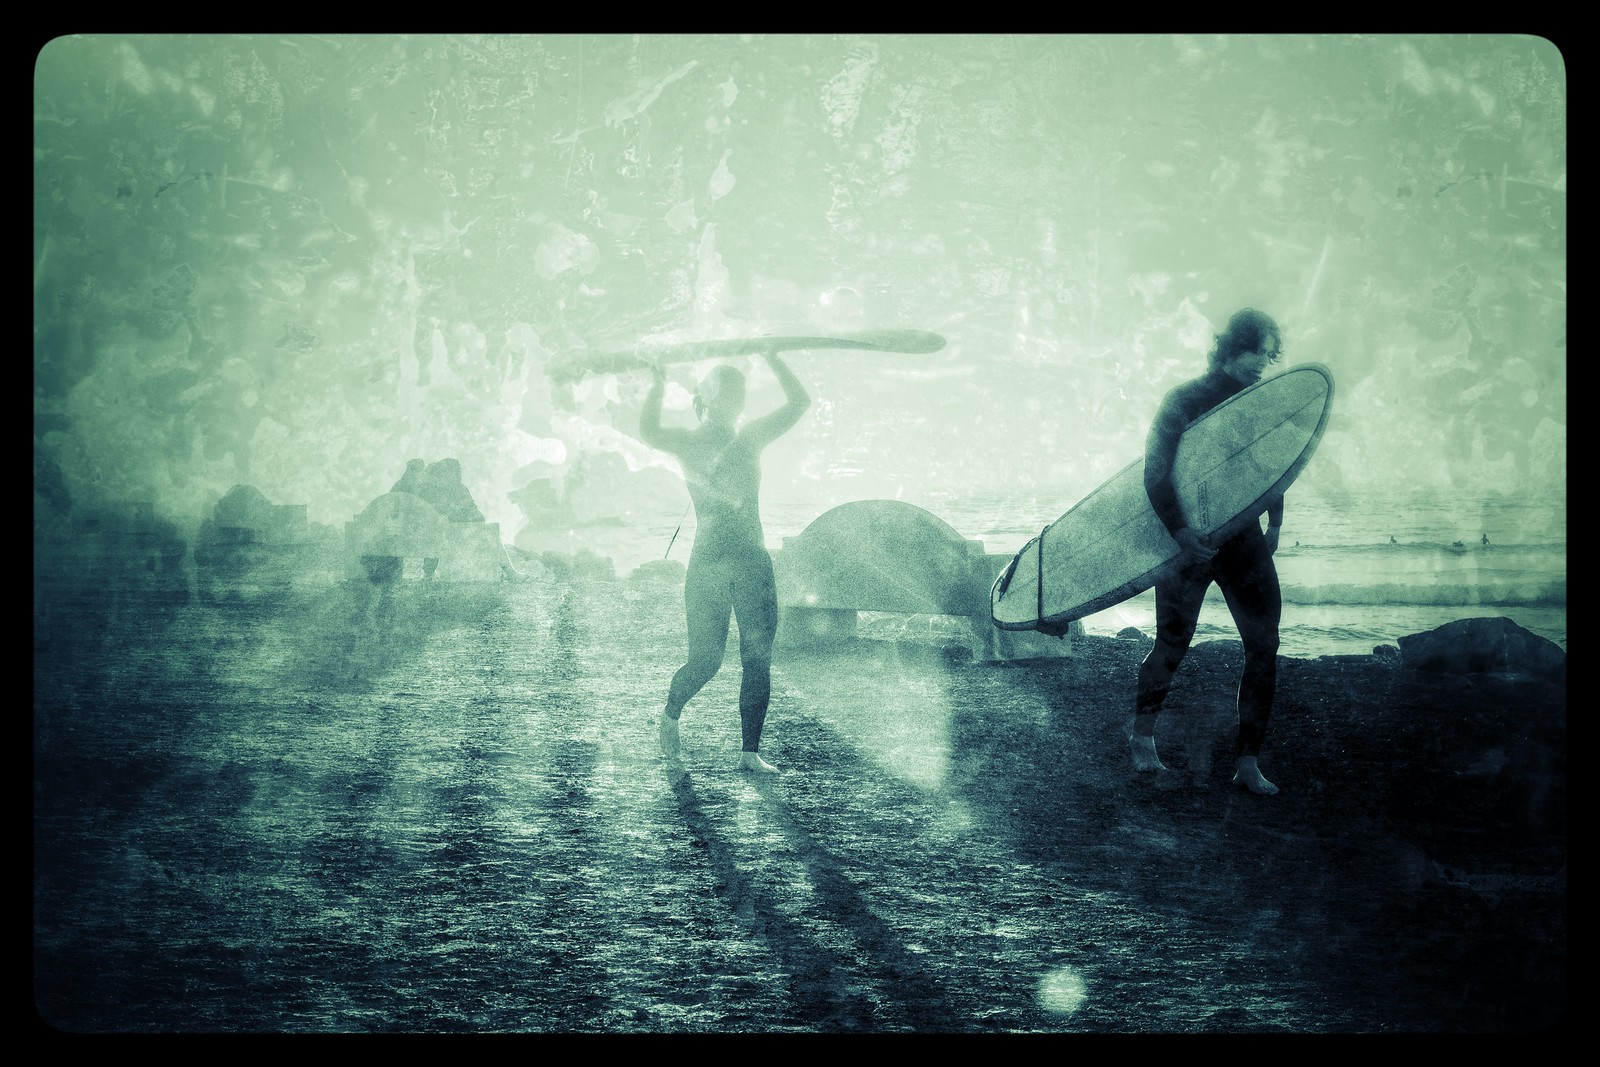 Surfers at The Rock (version)